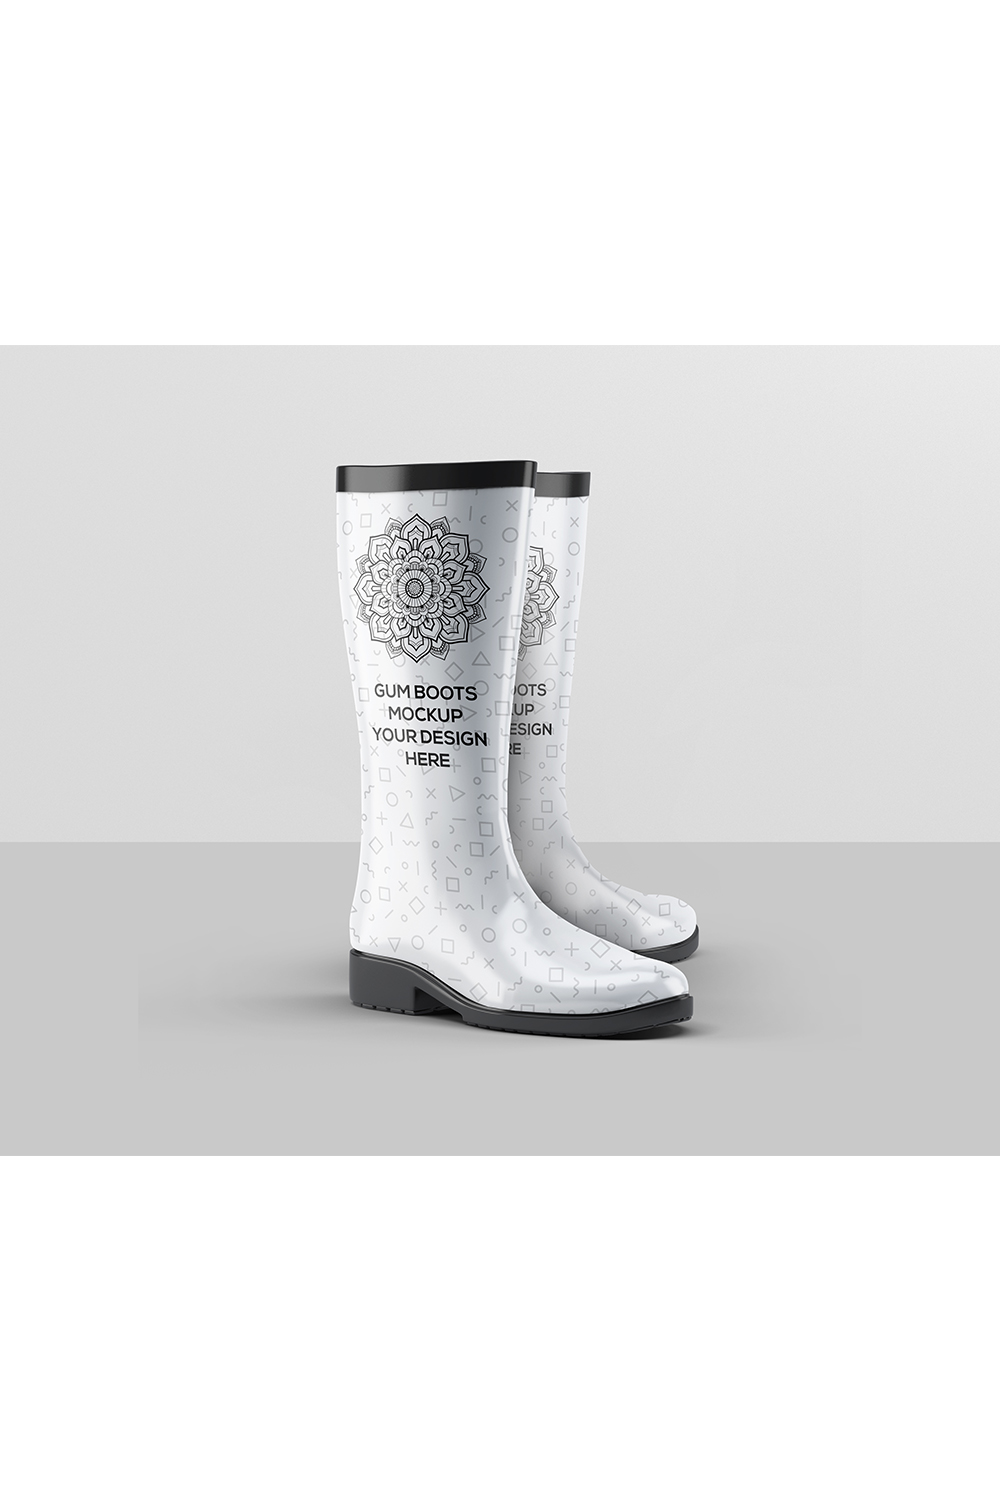 Gumboots Mockup pinterest preview image.